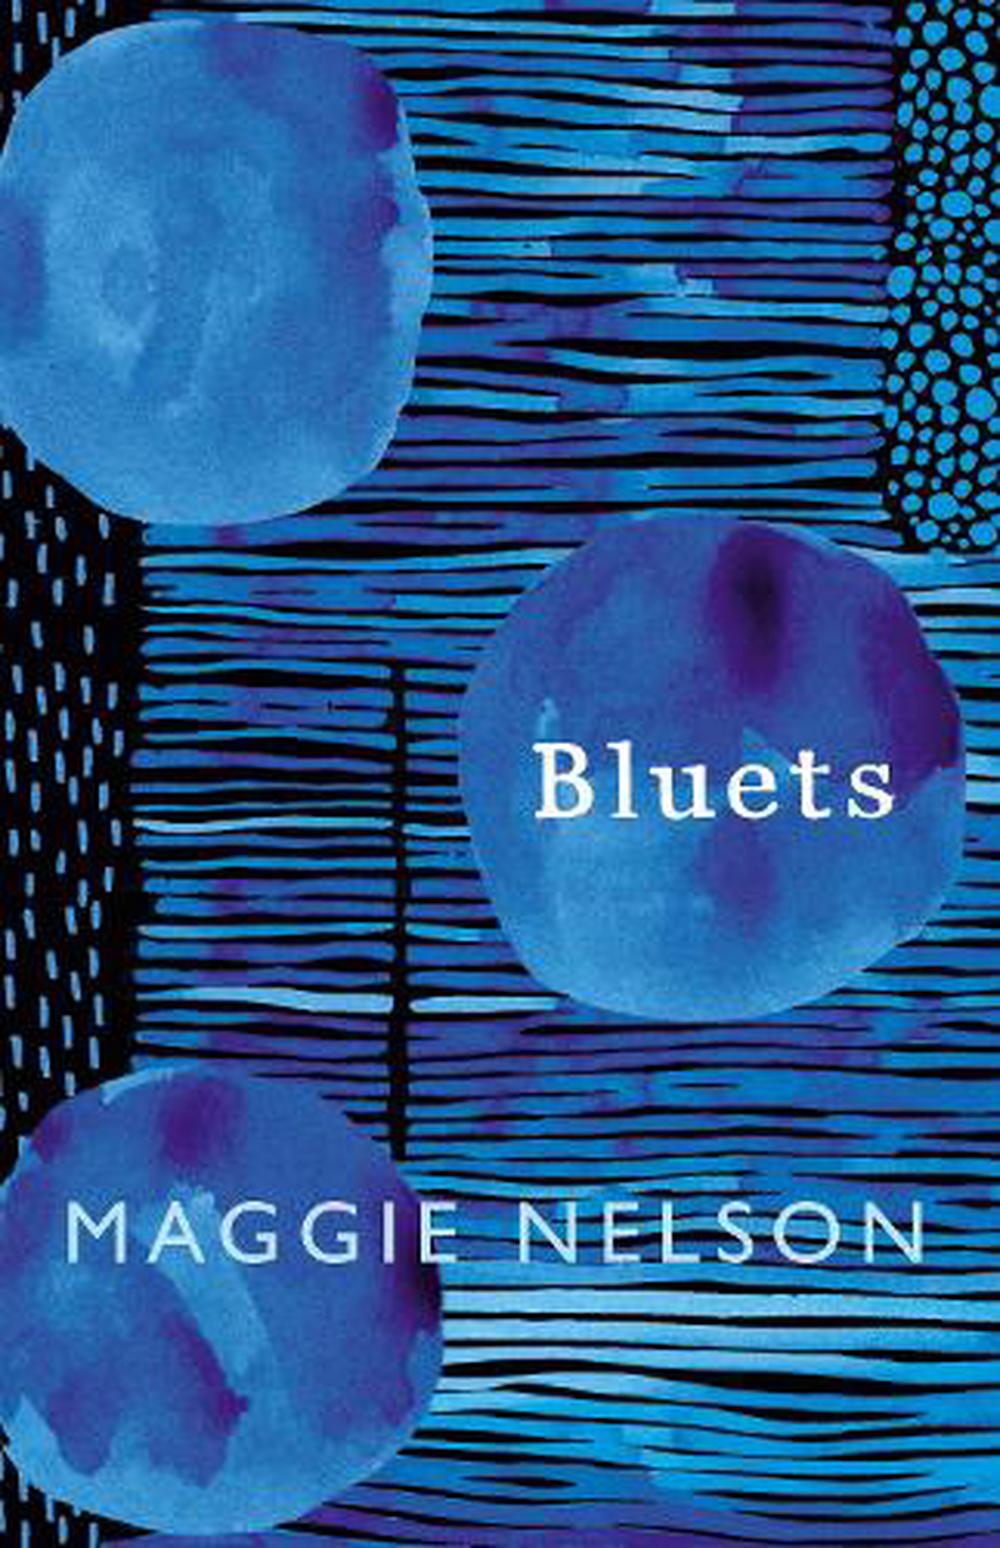 bluets maggie nelson review